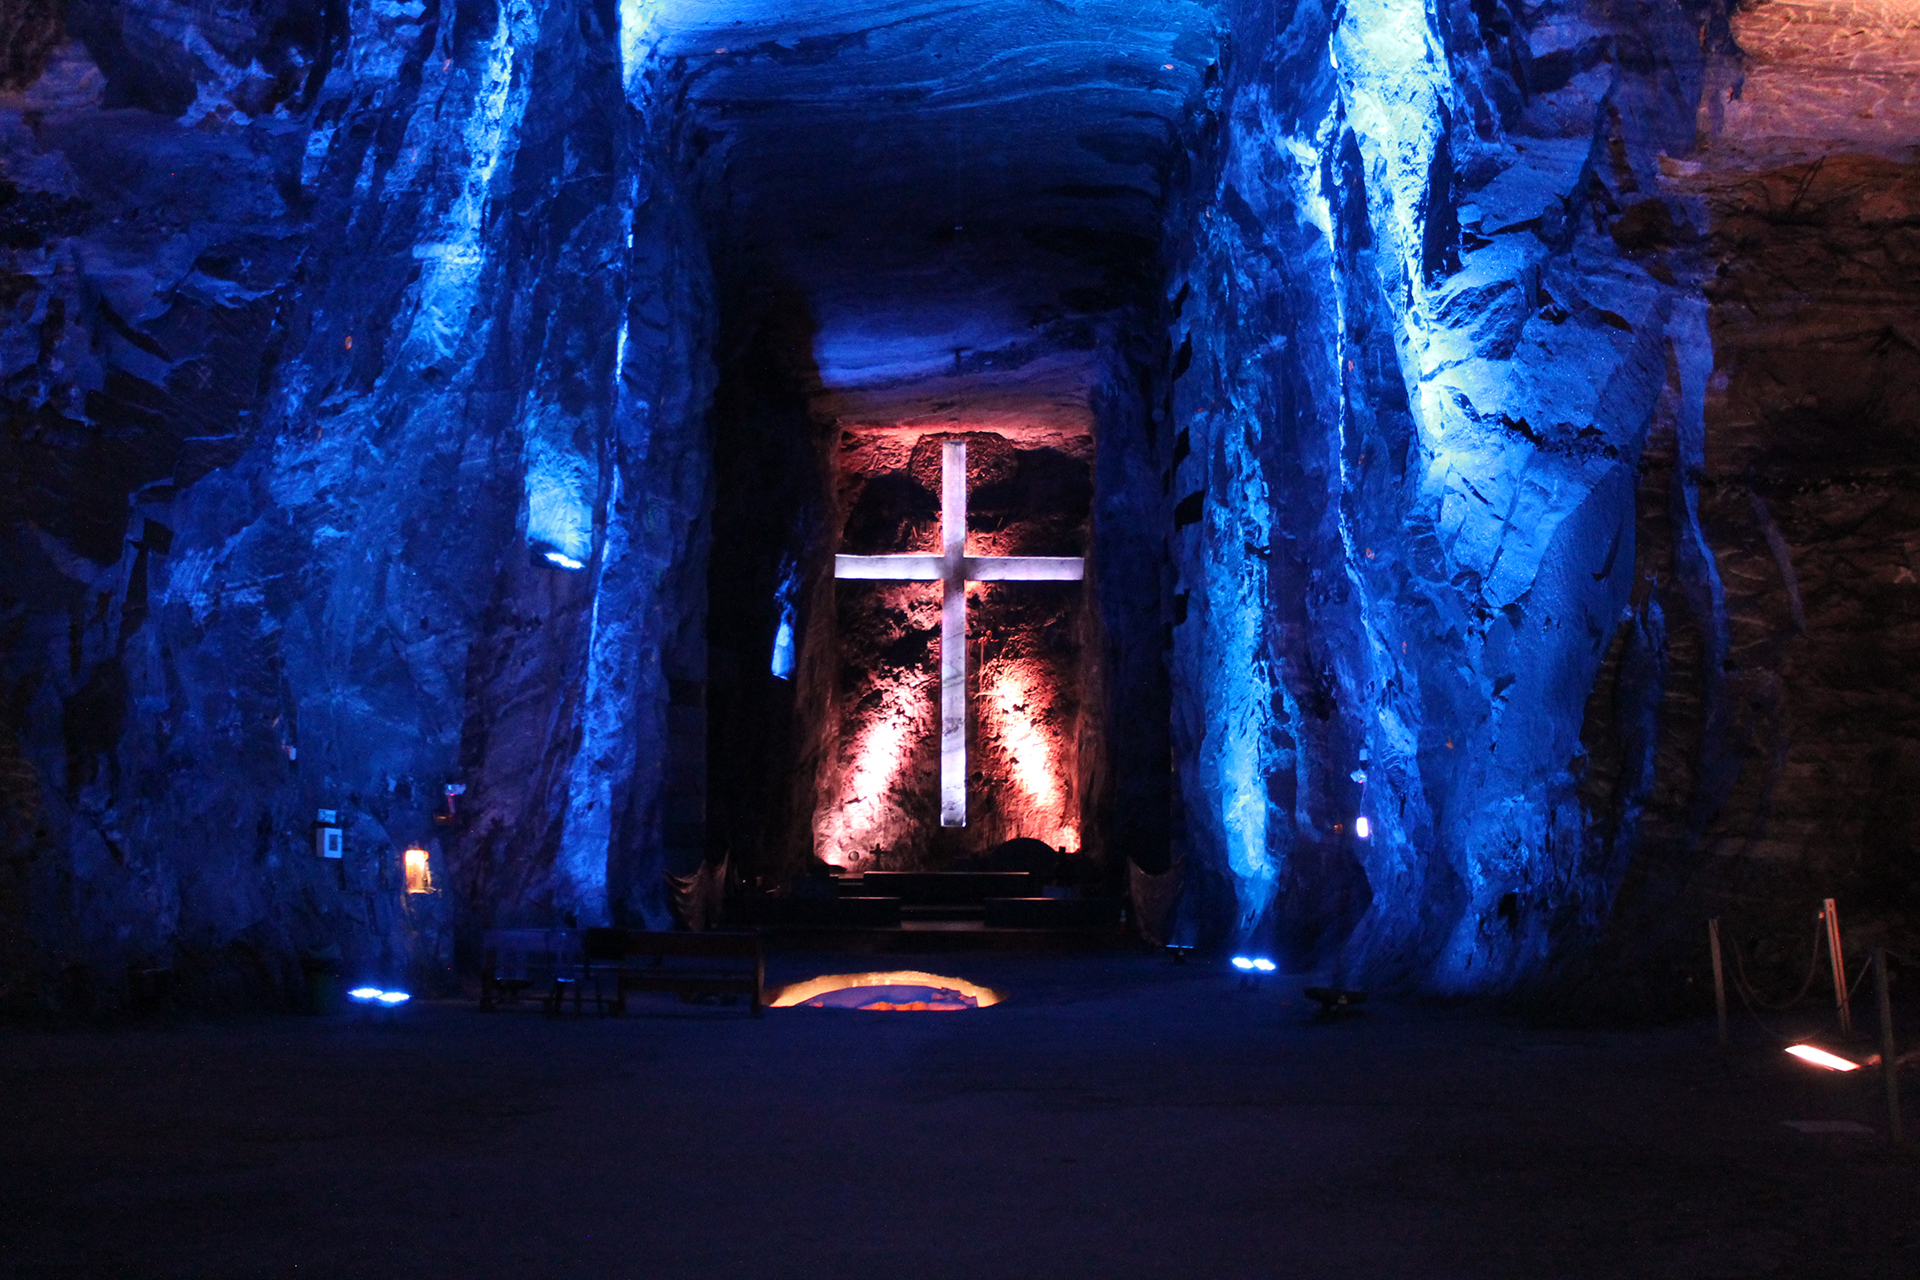 A large stone cross is illuminated in blue and white light against the backdrop of a cave with textured rock walls—a must-see when exploring tours in Bogotá.